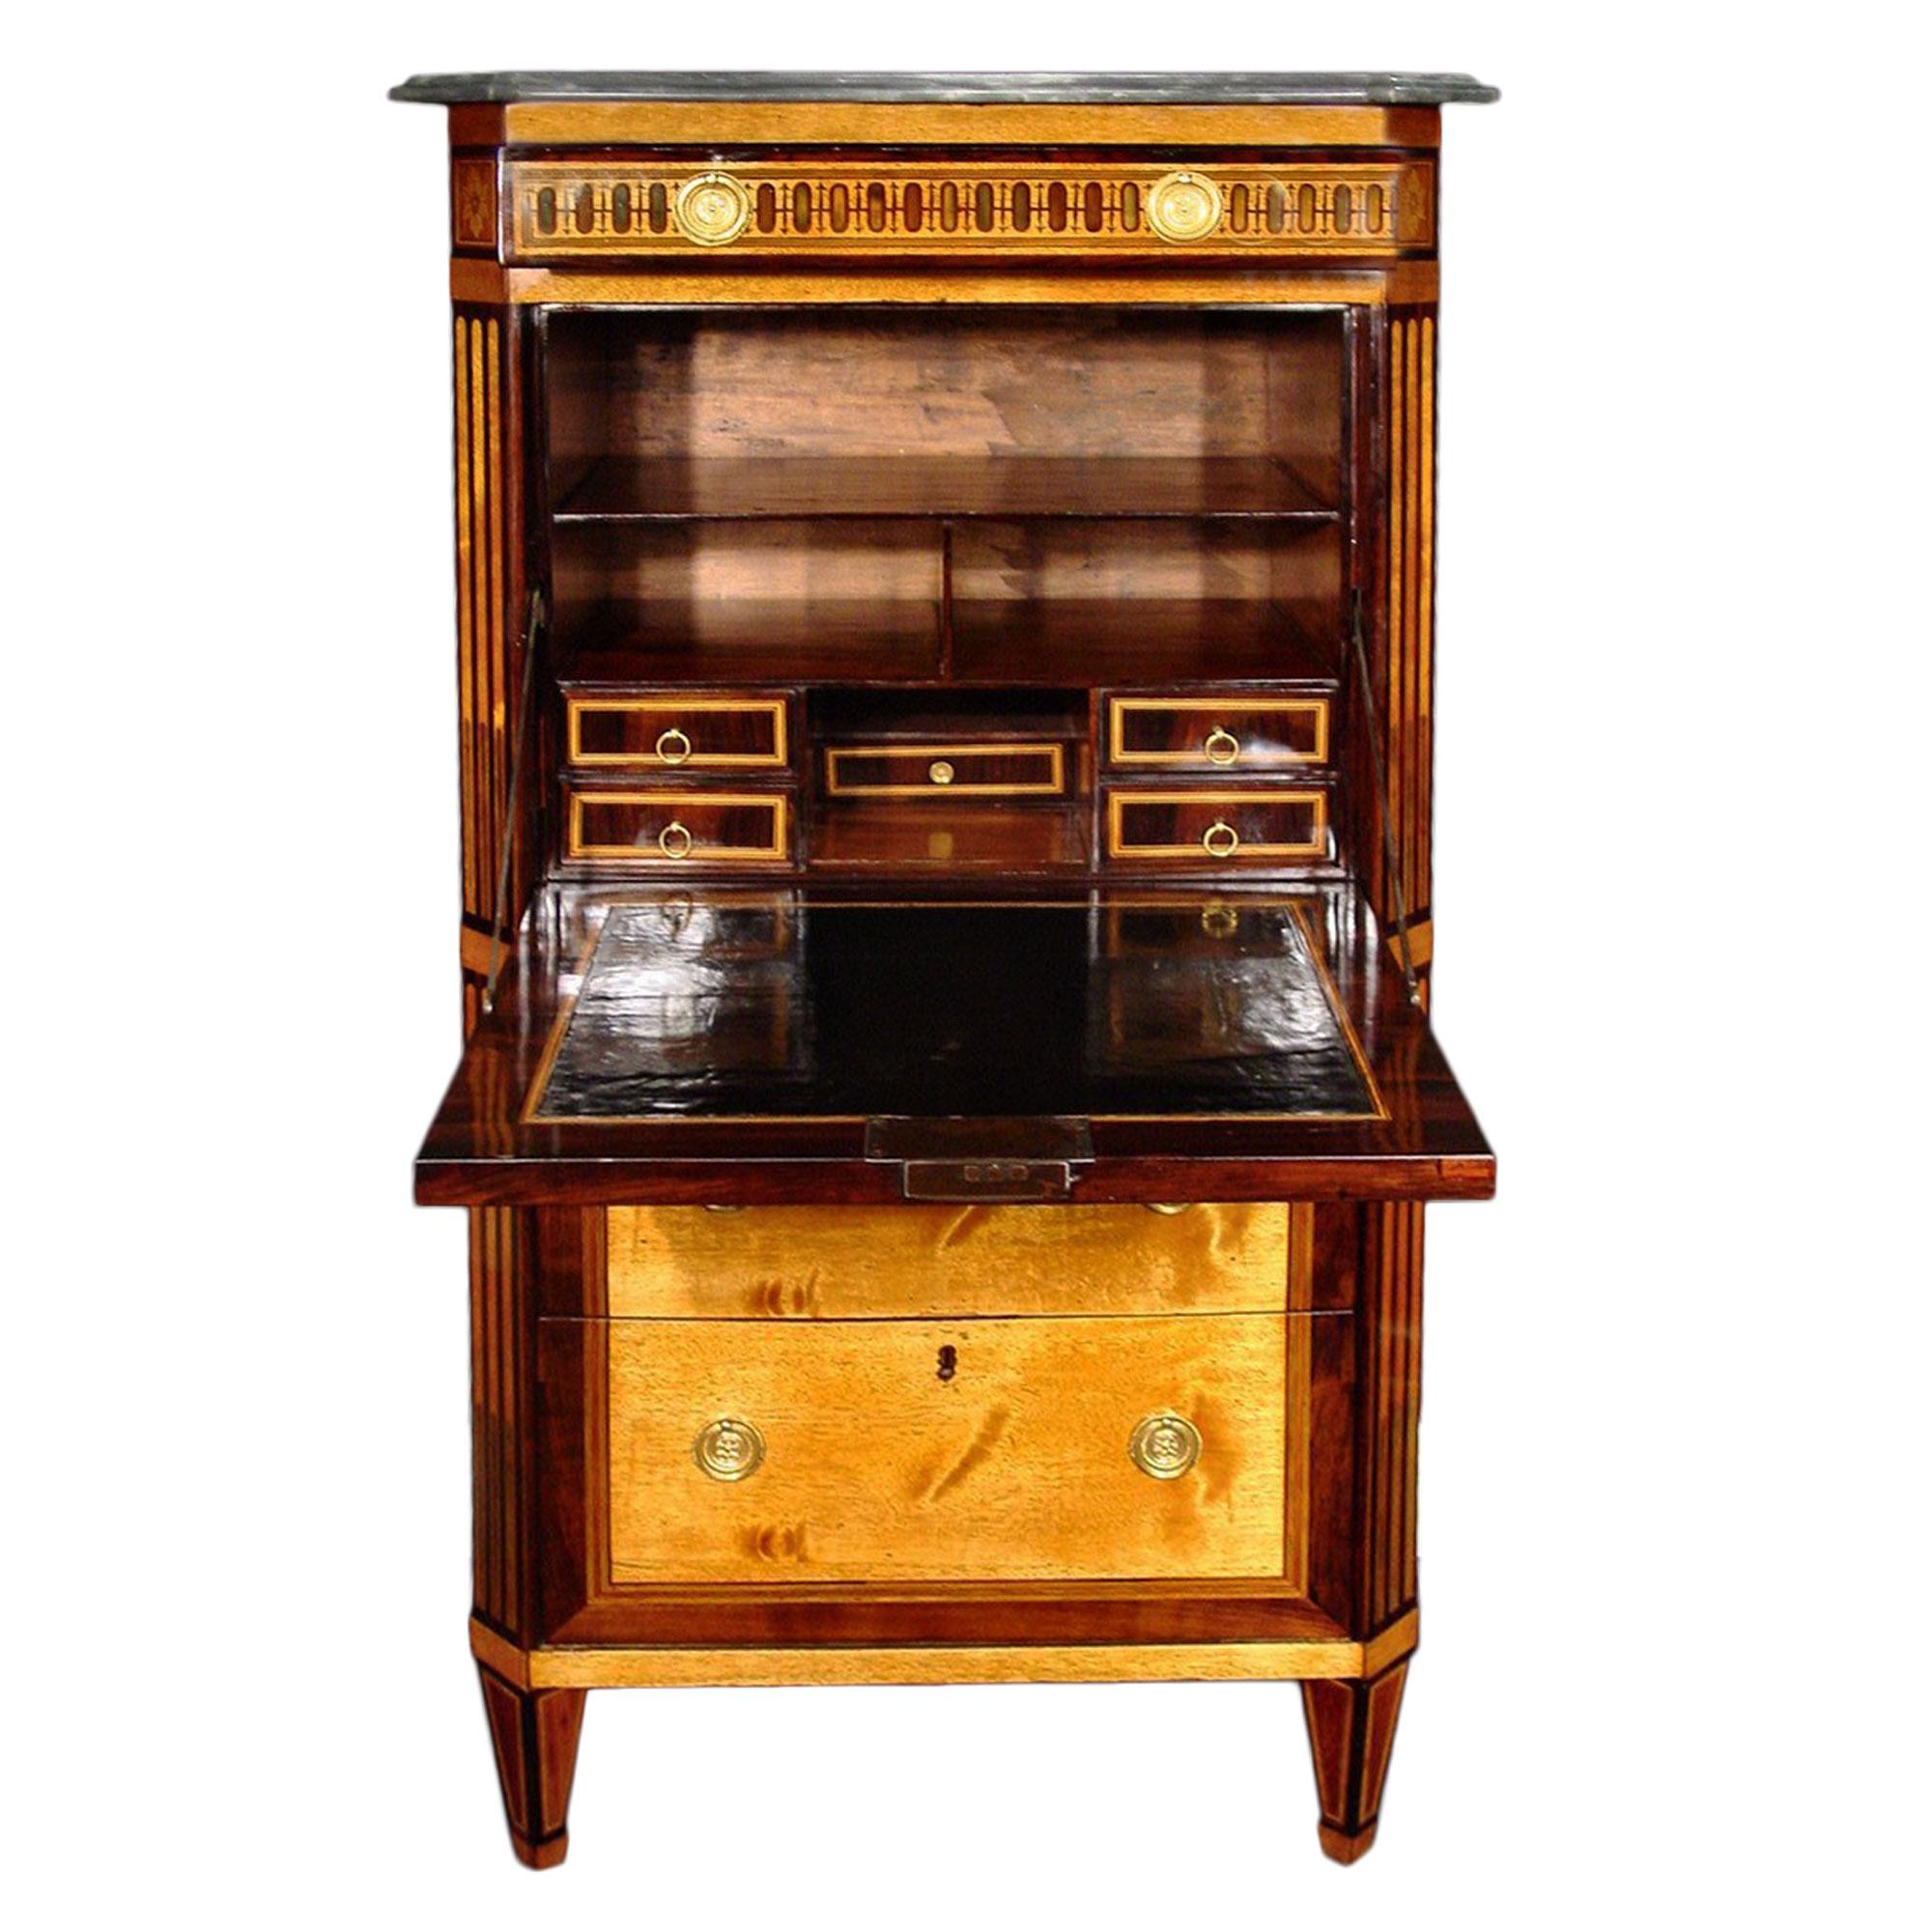 An elegant French 18th century Louis XVI period secretaire abattan. The secretary with two lower deep drawers is below the drop front designed with an intricate floral marquetry of exotic woods and mother of pearl. The fruitwood inlay is both on the